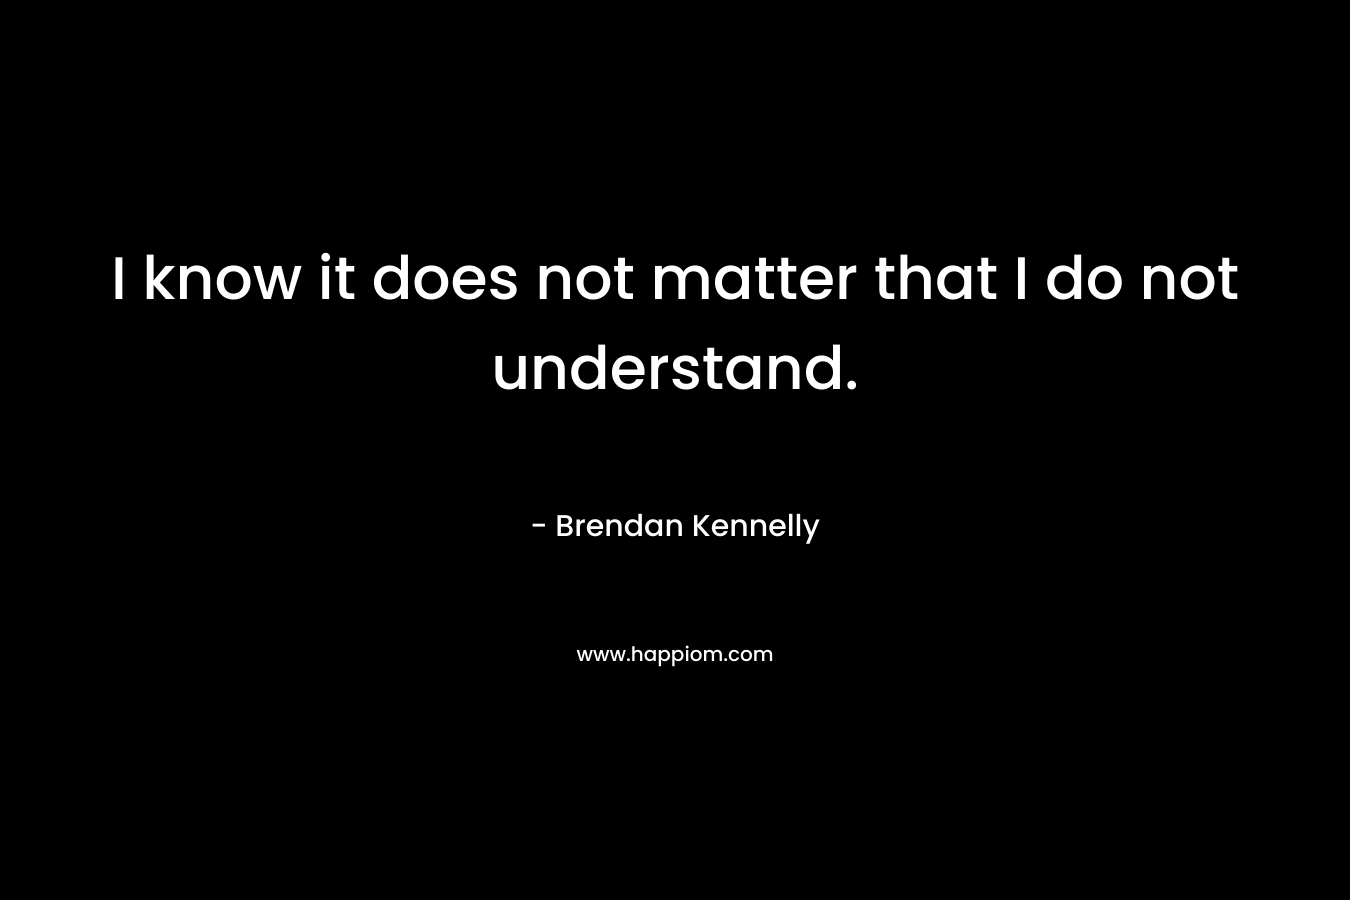 I know it does not matter that I do not understand. – Brendan Kennelly